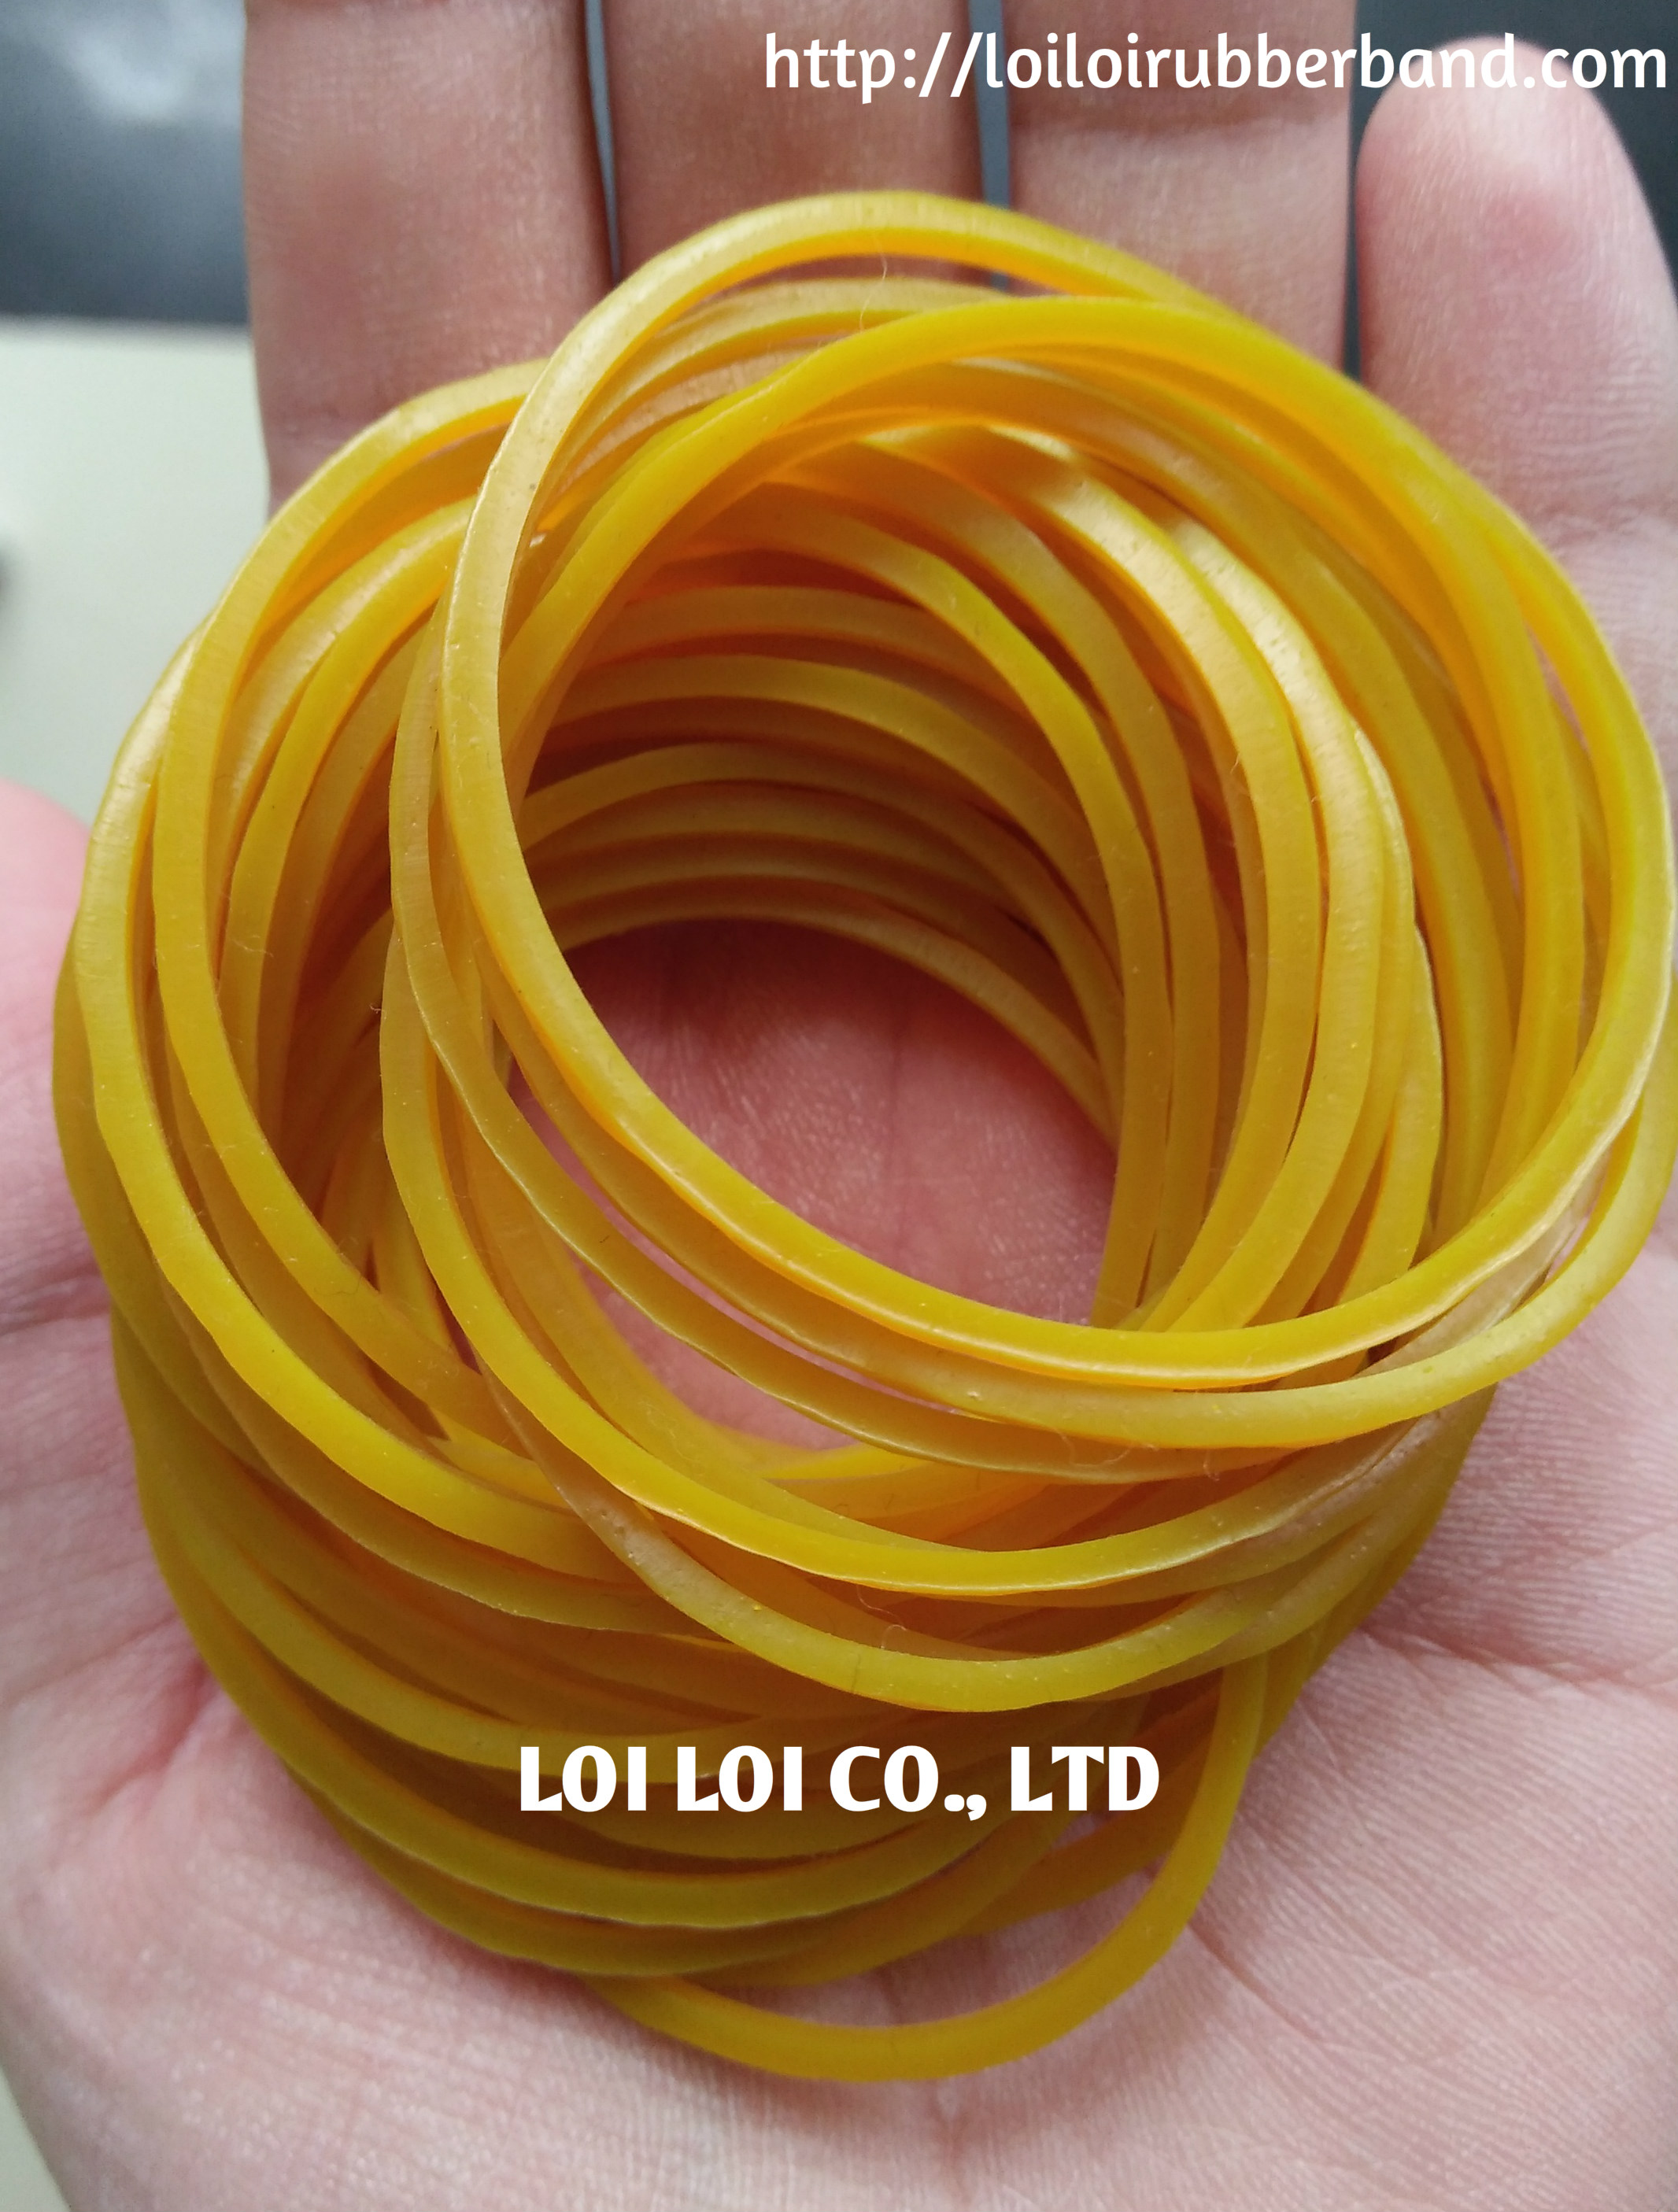 High quality durable bright yellow color elastic / Natural rubber band for tying vegetables and any purposes 